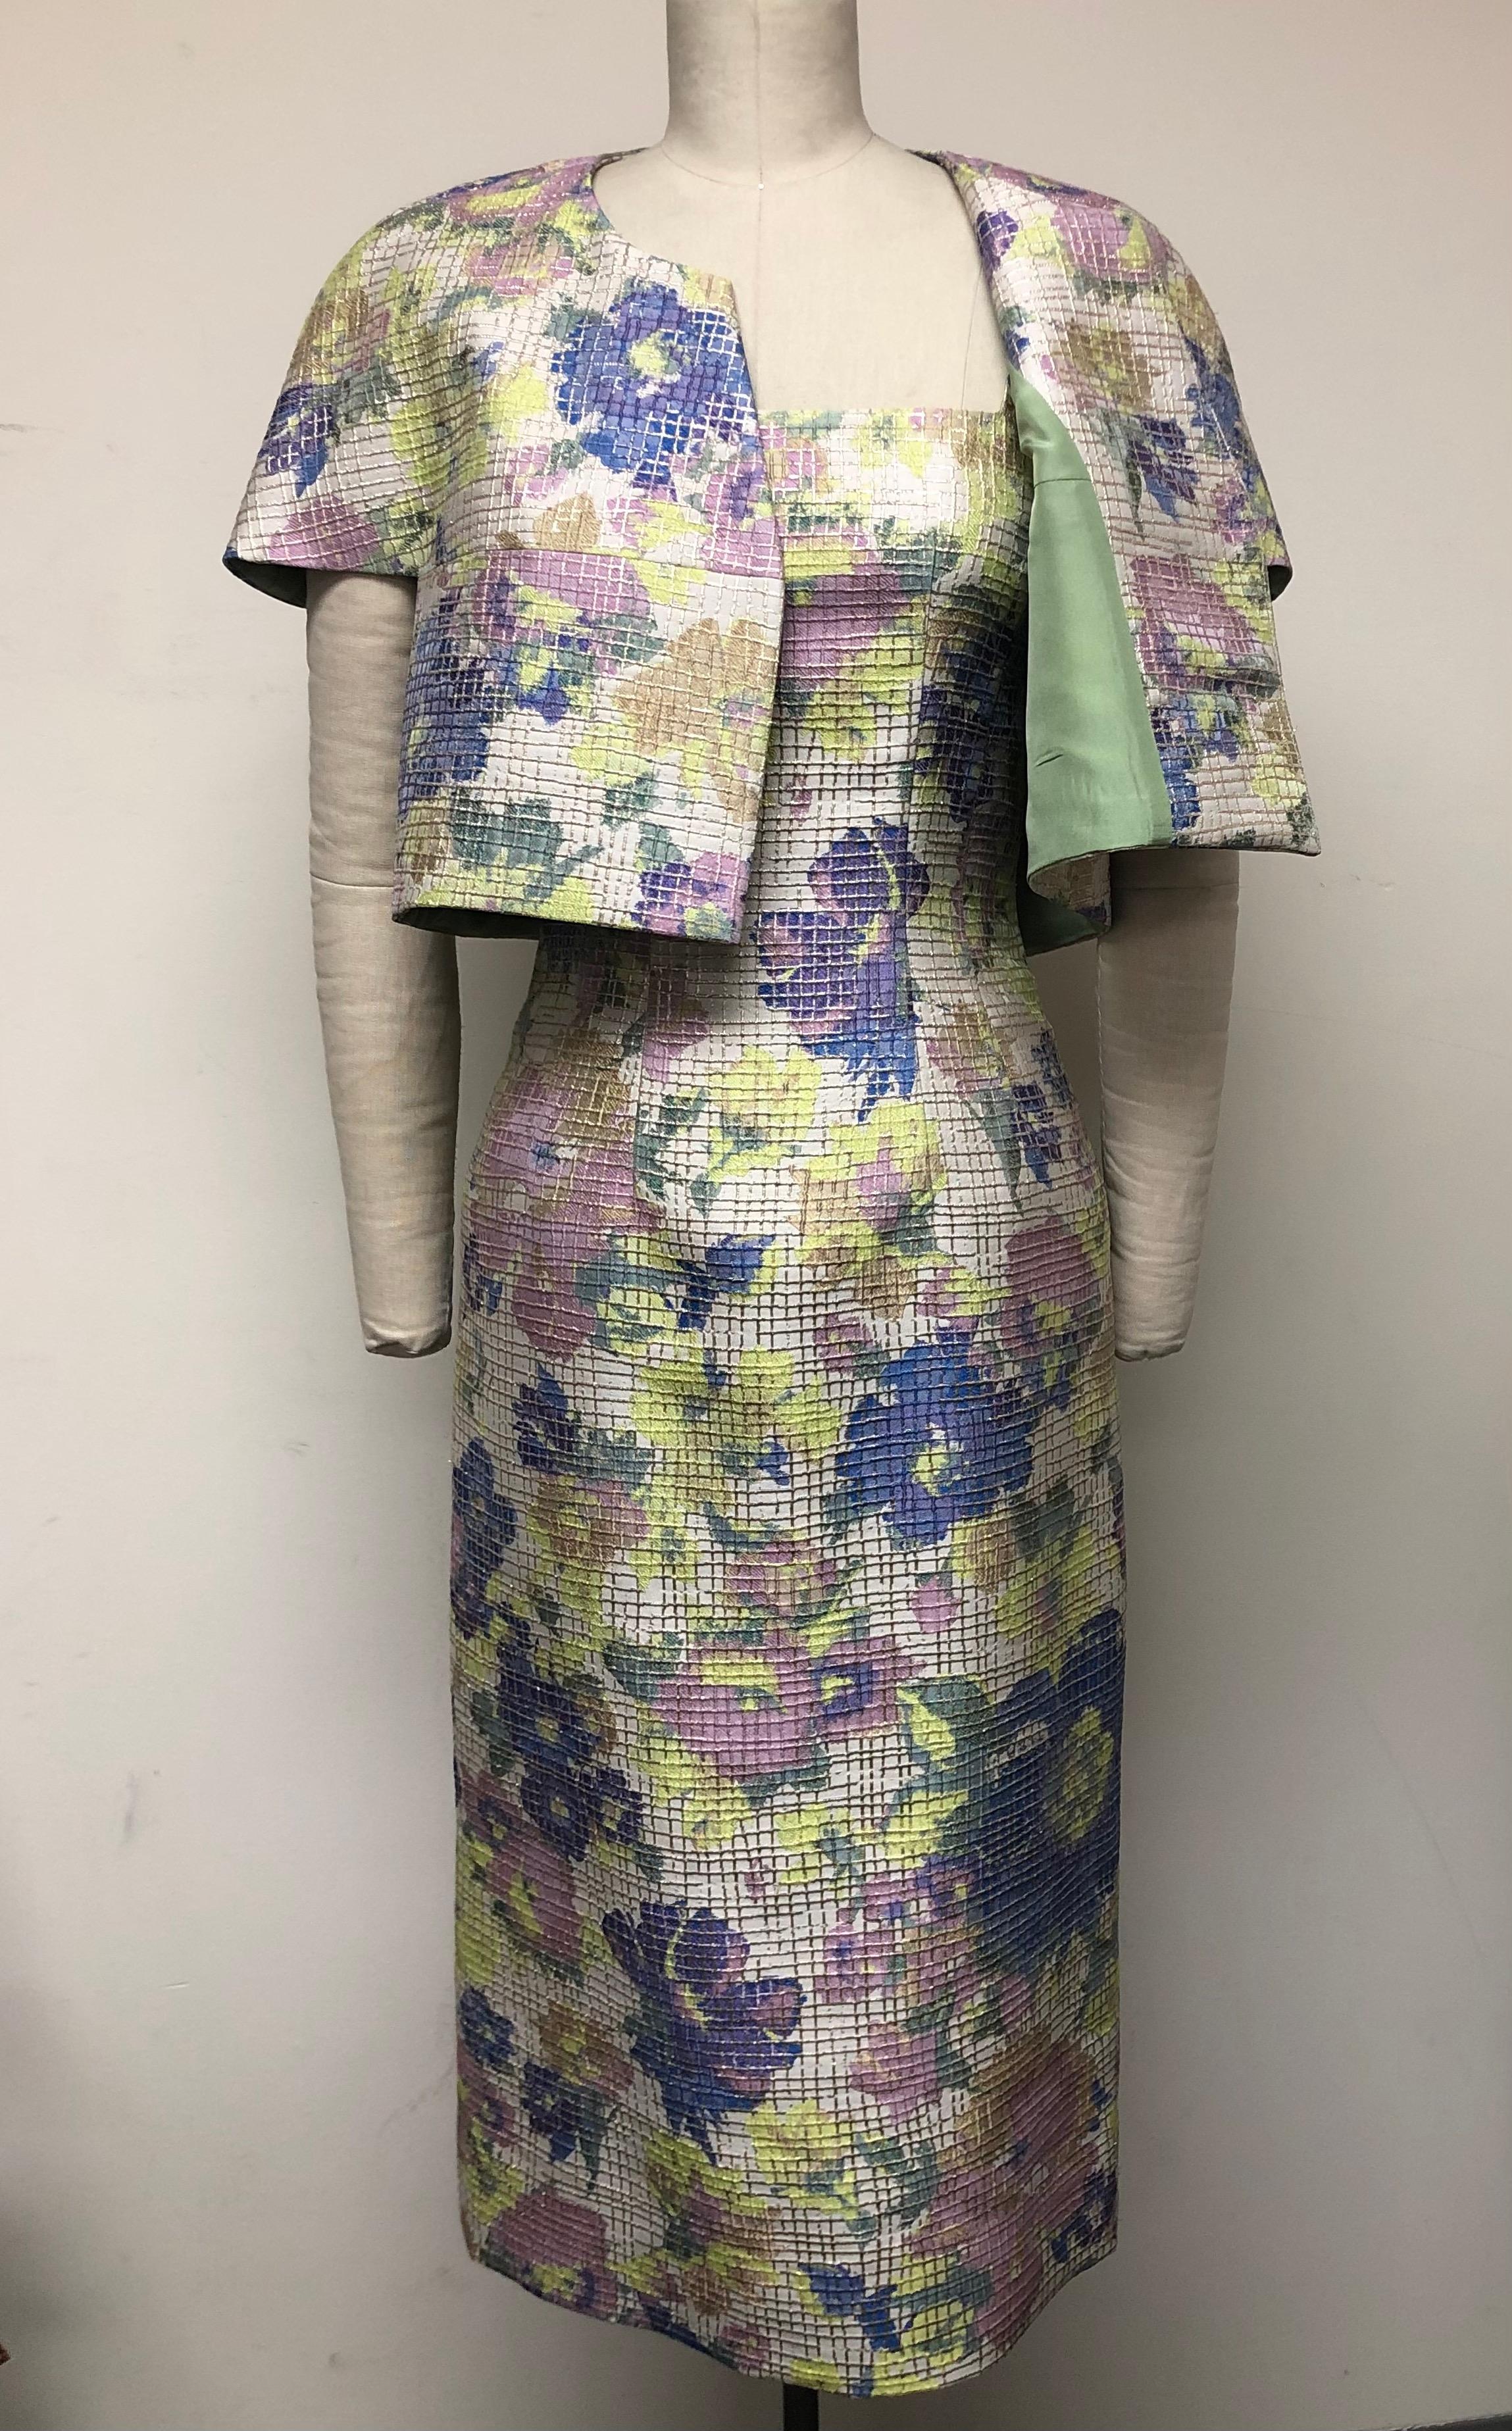 Ensemble dressing at its most elegant! French multi-floral lavender and blue brocade. Wonderfully unique—this fitted square neck slim dress is complemented by a charming matching capelet jacket. The soft floral pattern is enhanced by its metallic